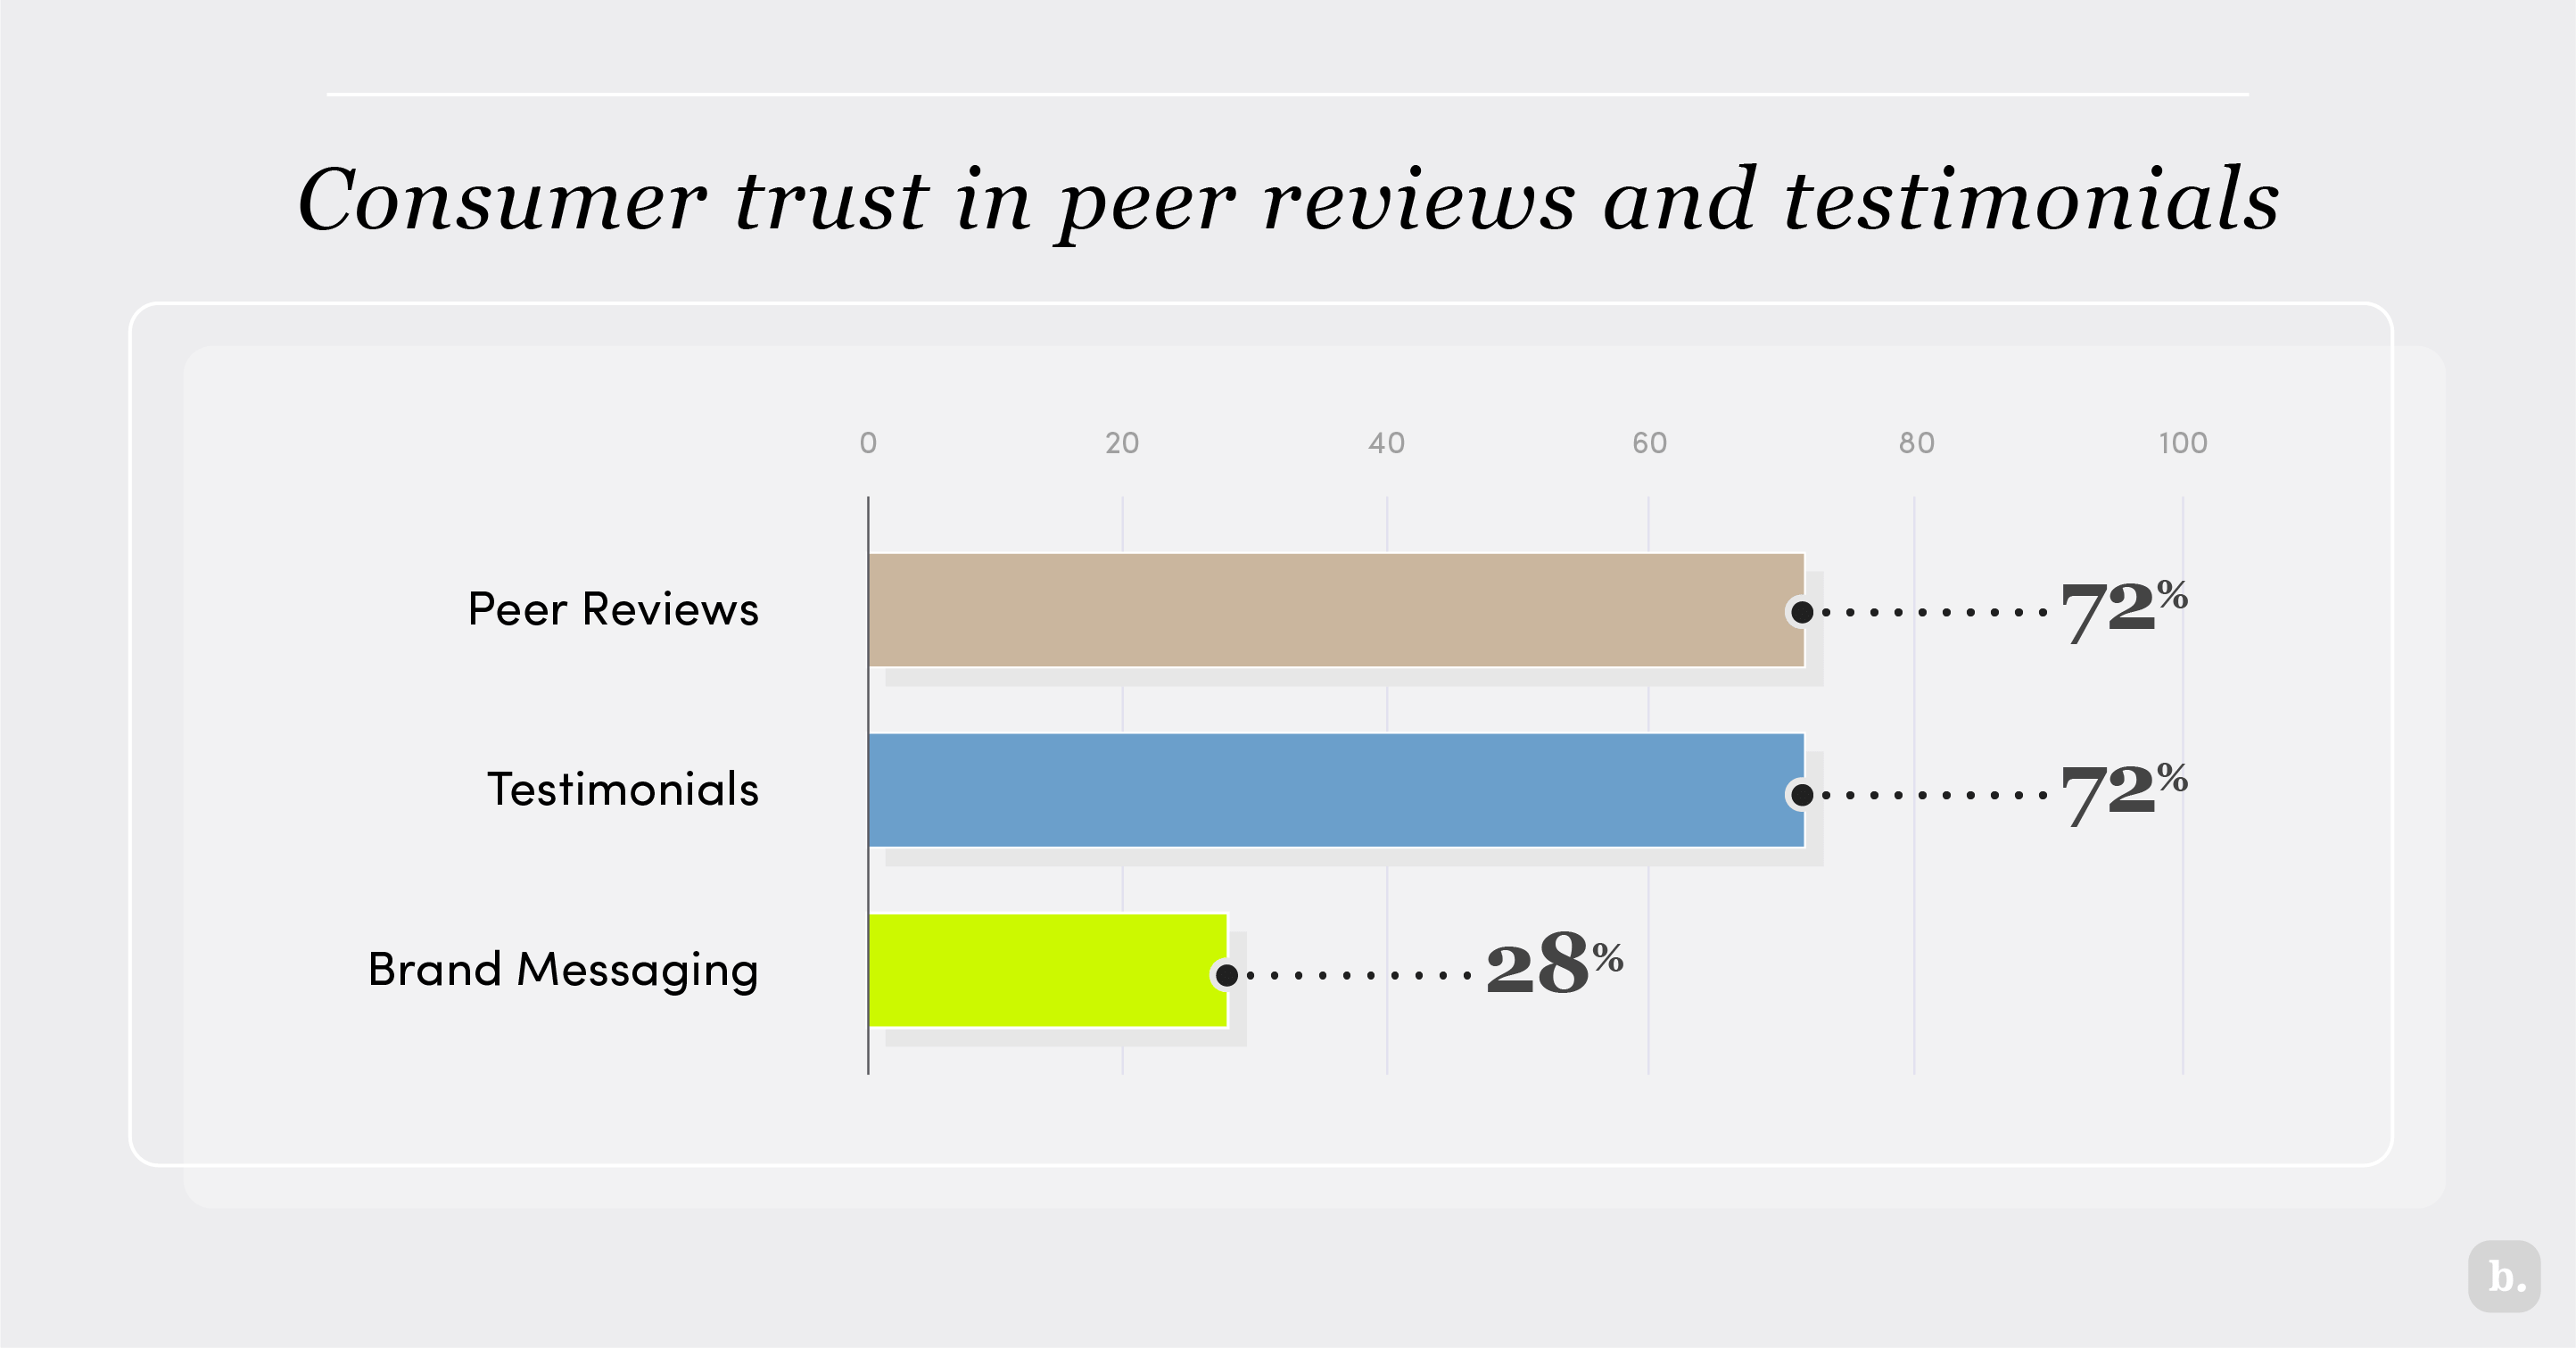 Consumer trust in peer reviews and testimonials